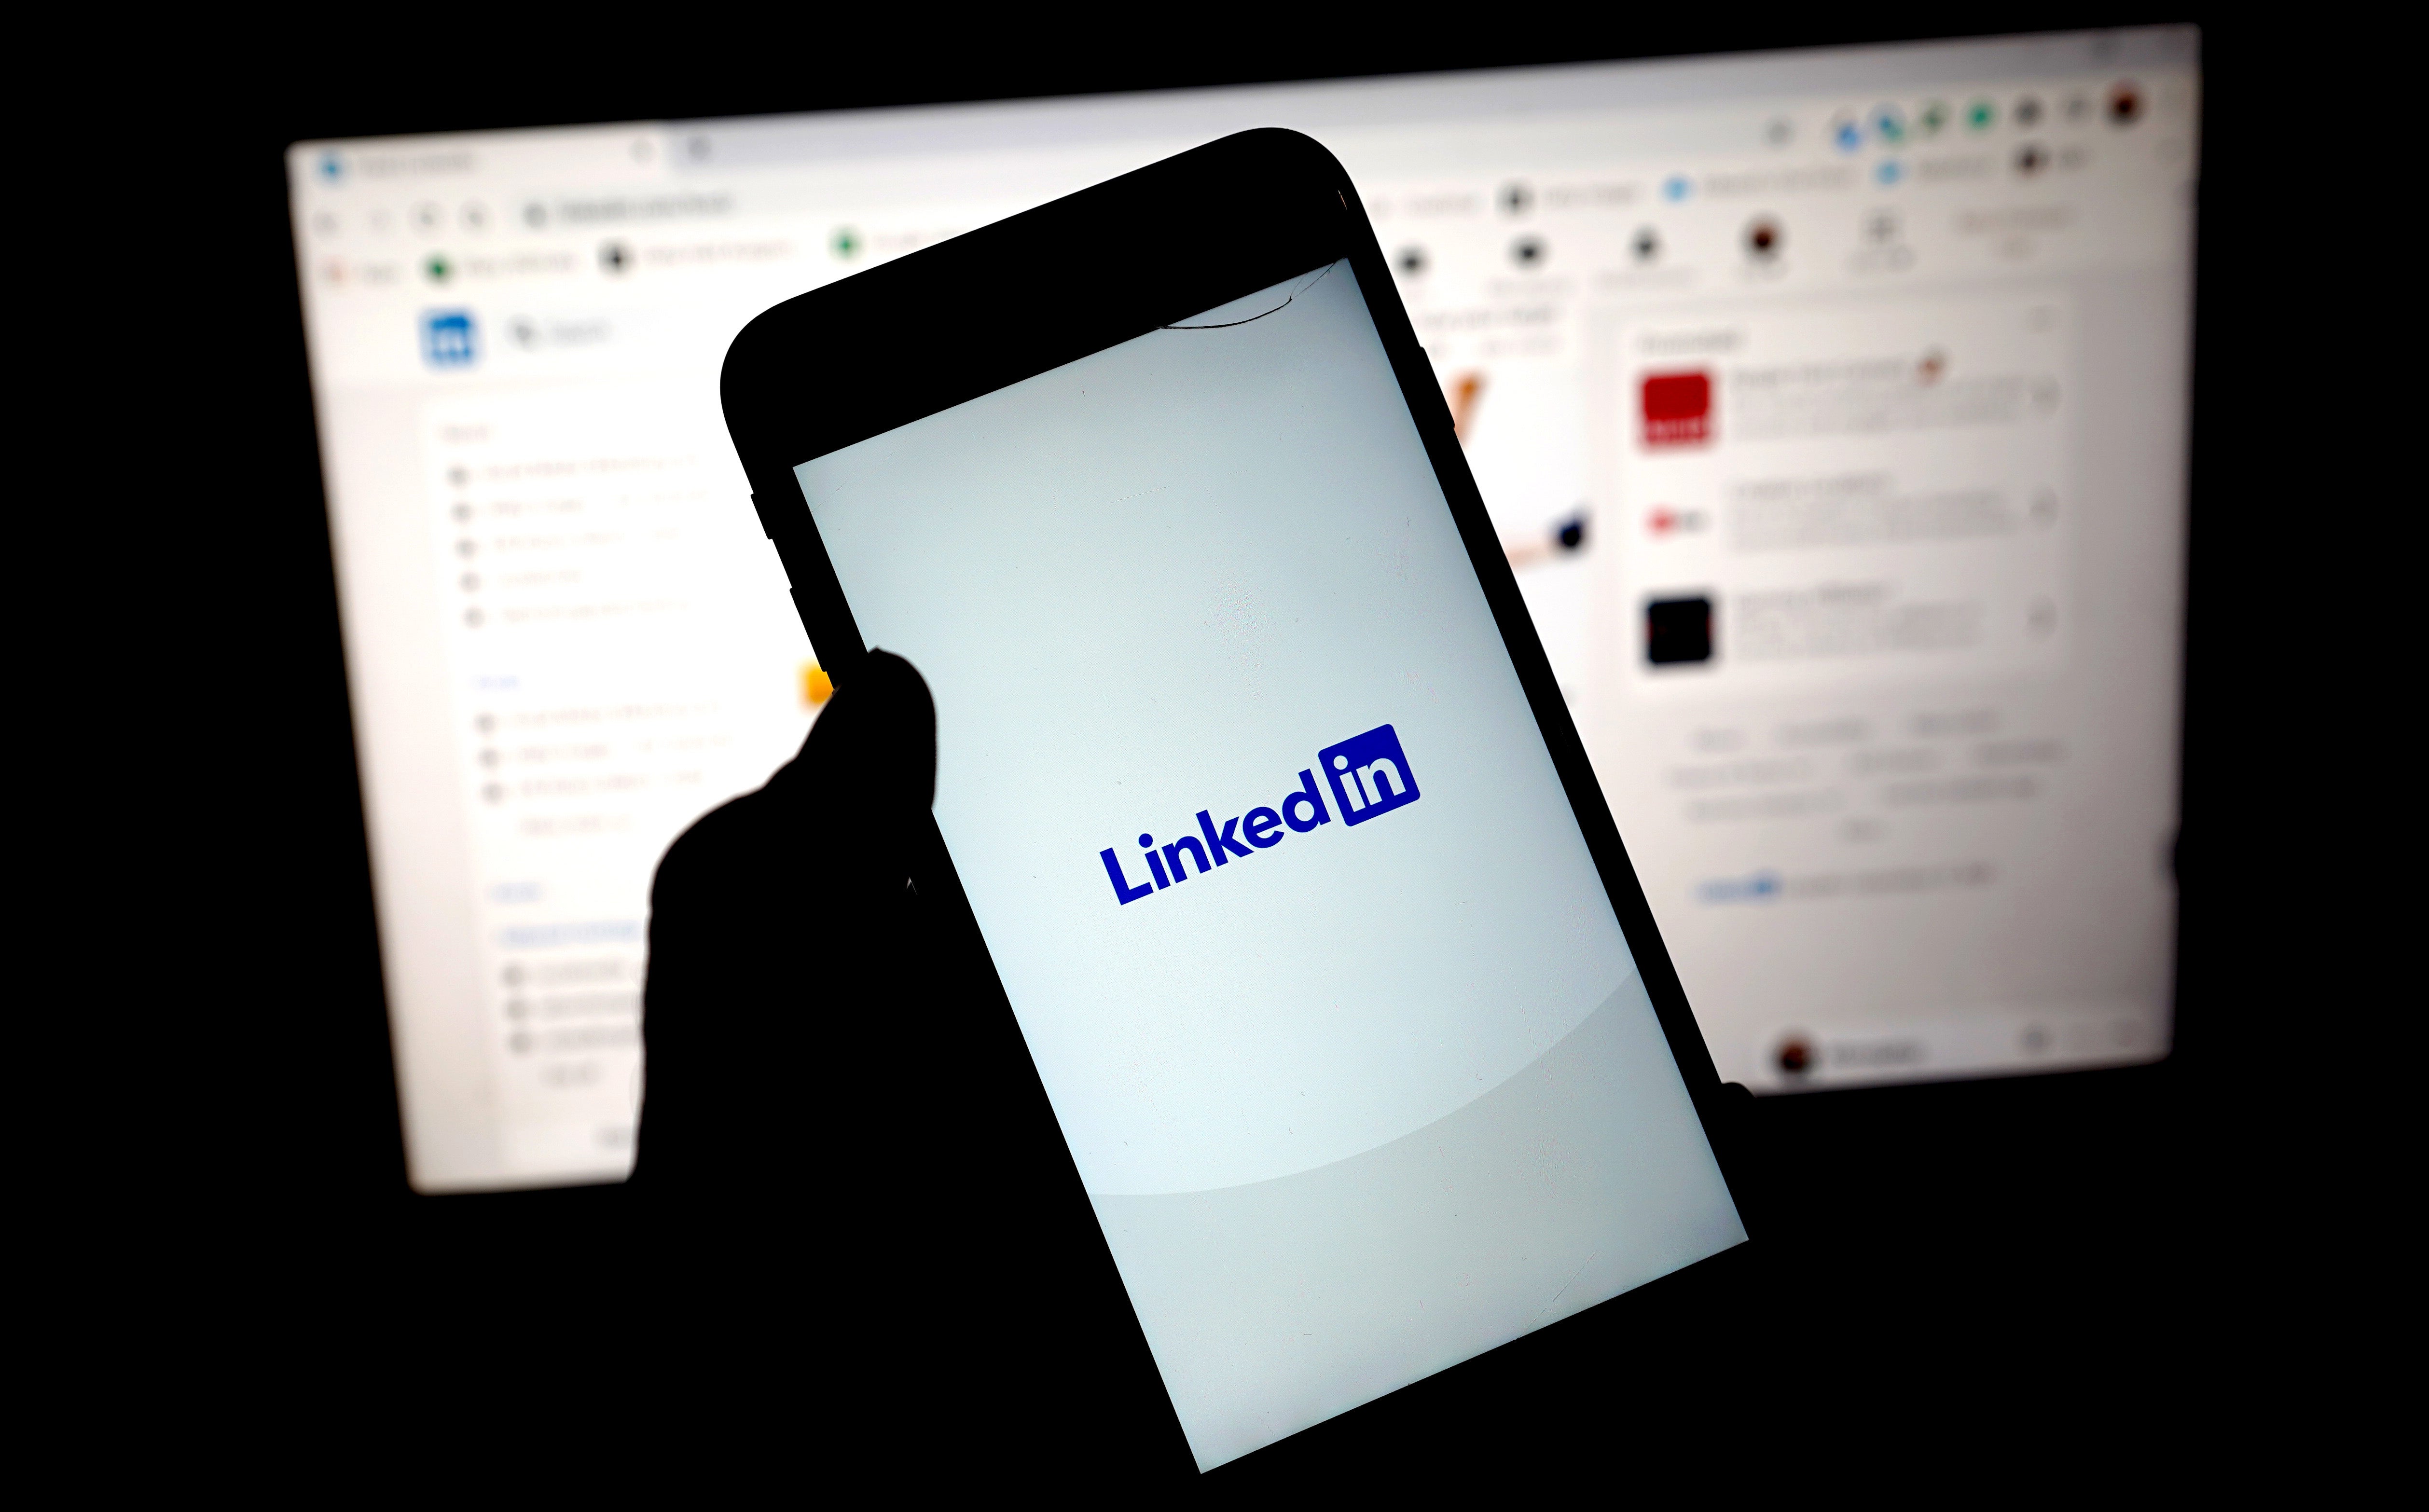 Those who applied for jobs via LinkedIn admitted to checking the site four times a day to see if they’d received a response&nbsp;